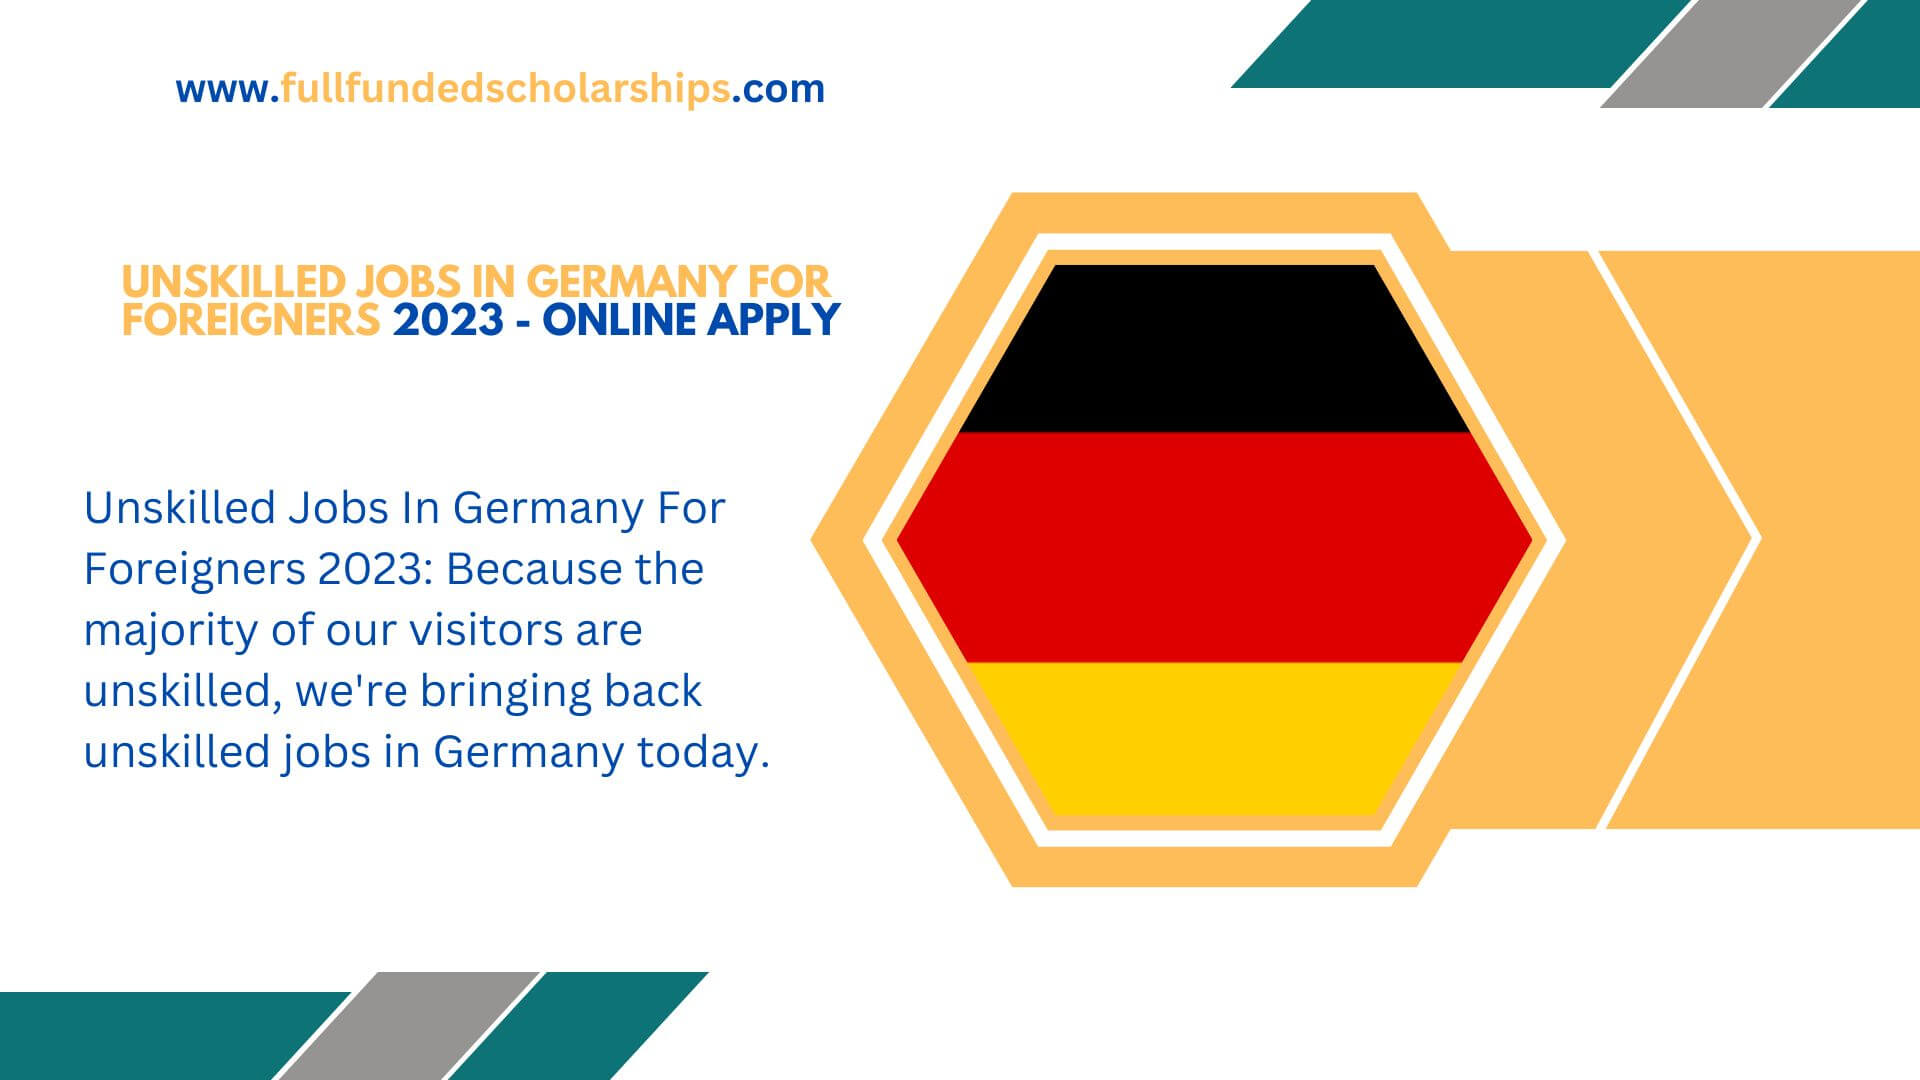 Unskilled Jobs In Germany For Foreigners 2023 - Online Apply